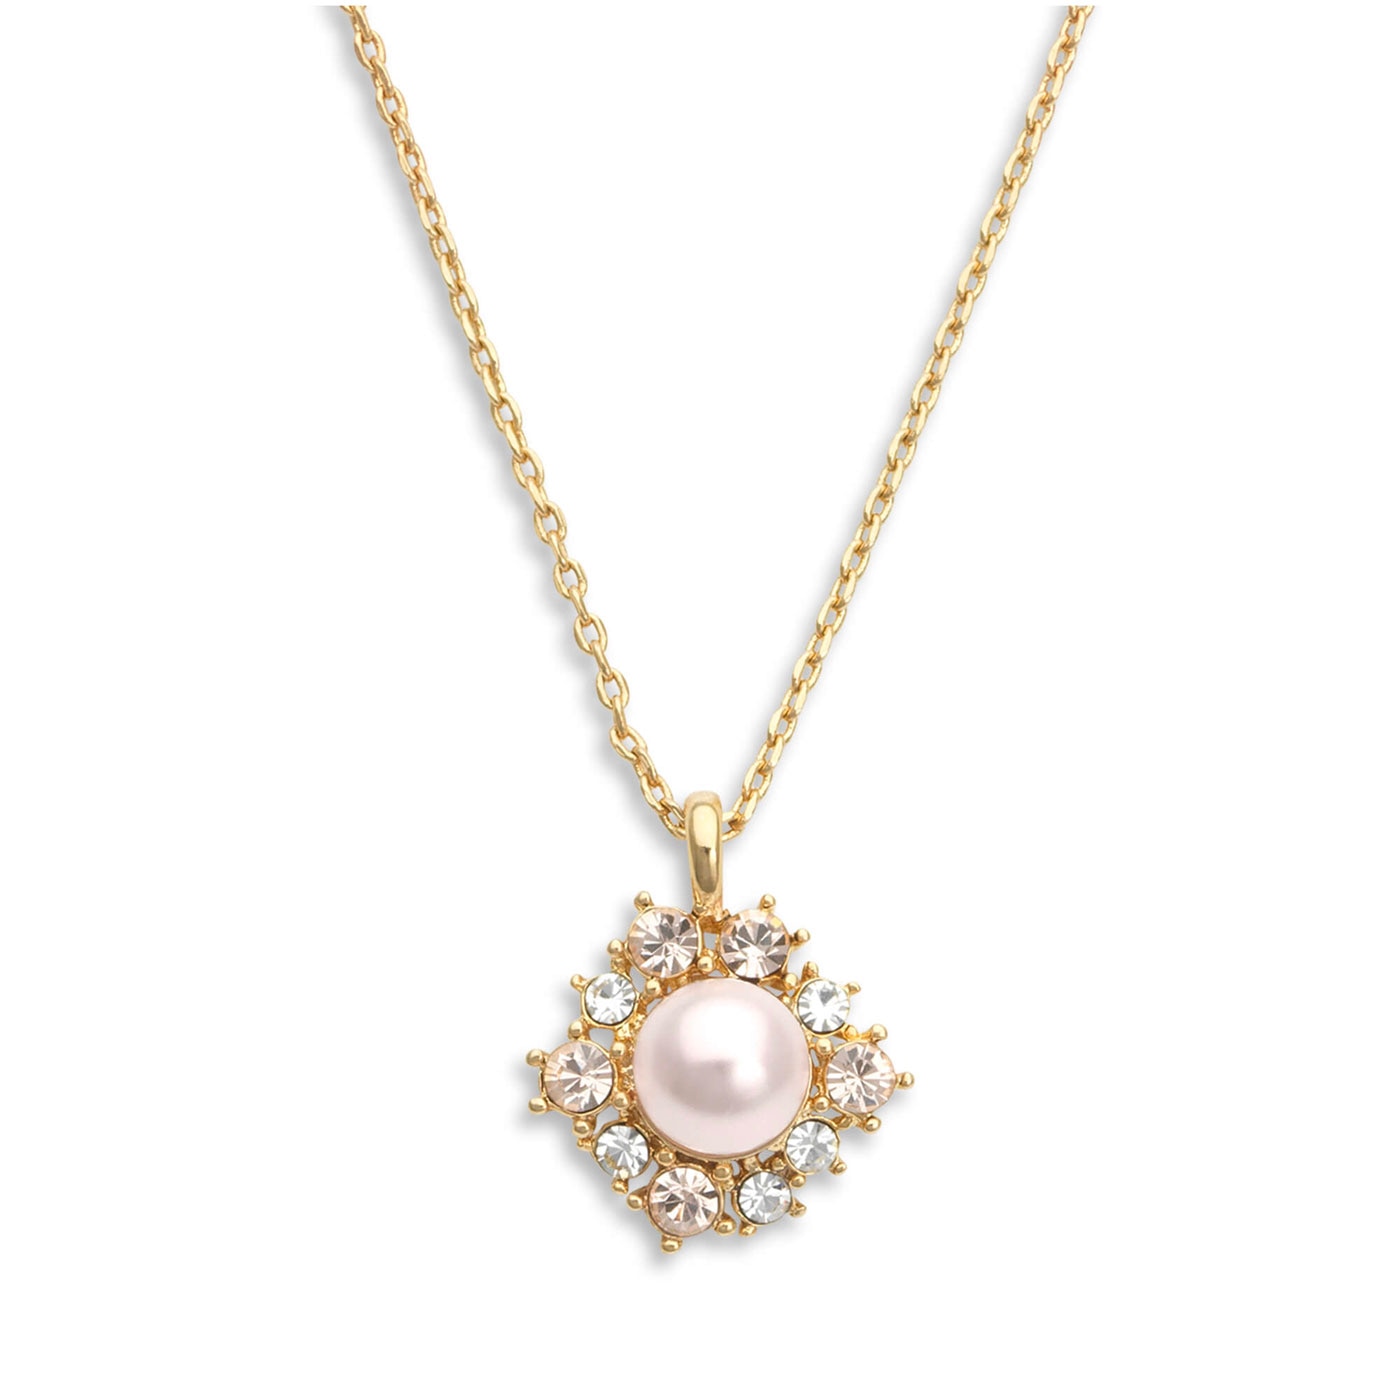 Emily pearl necklace - Rosaline